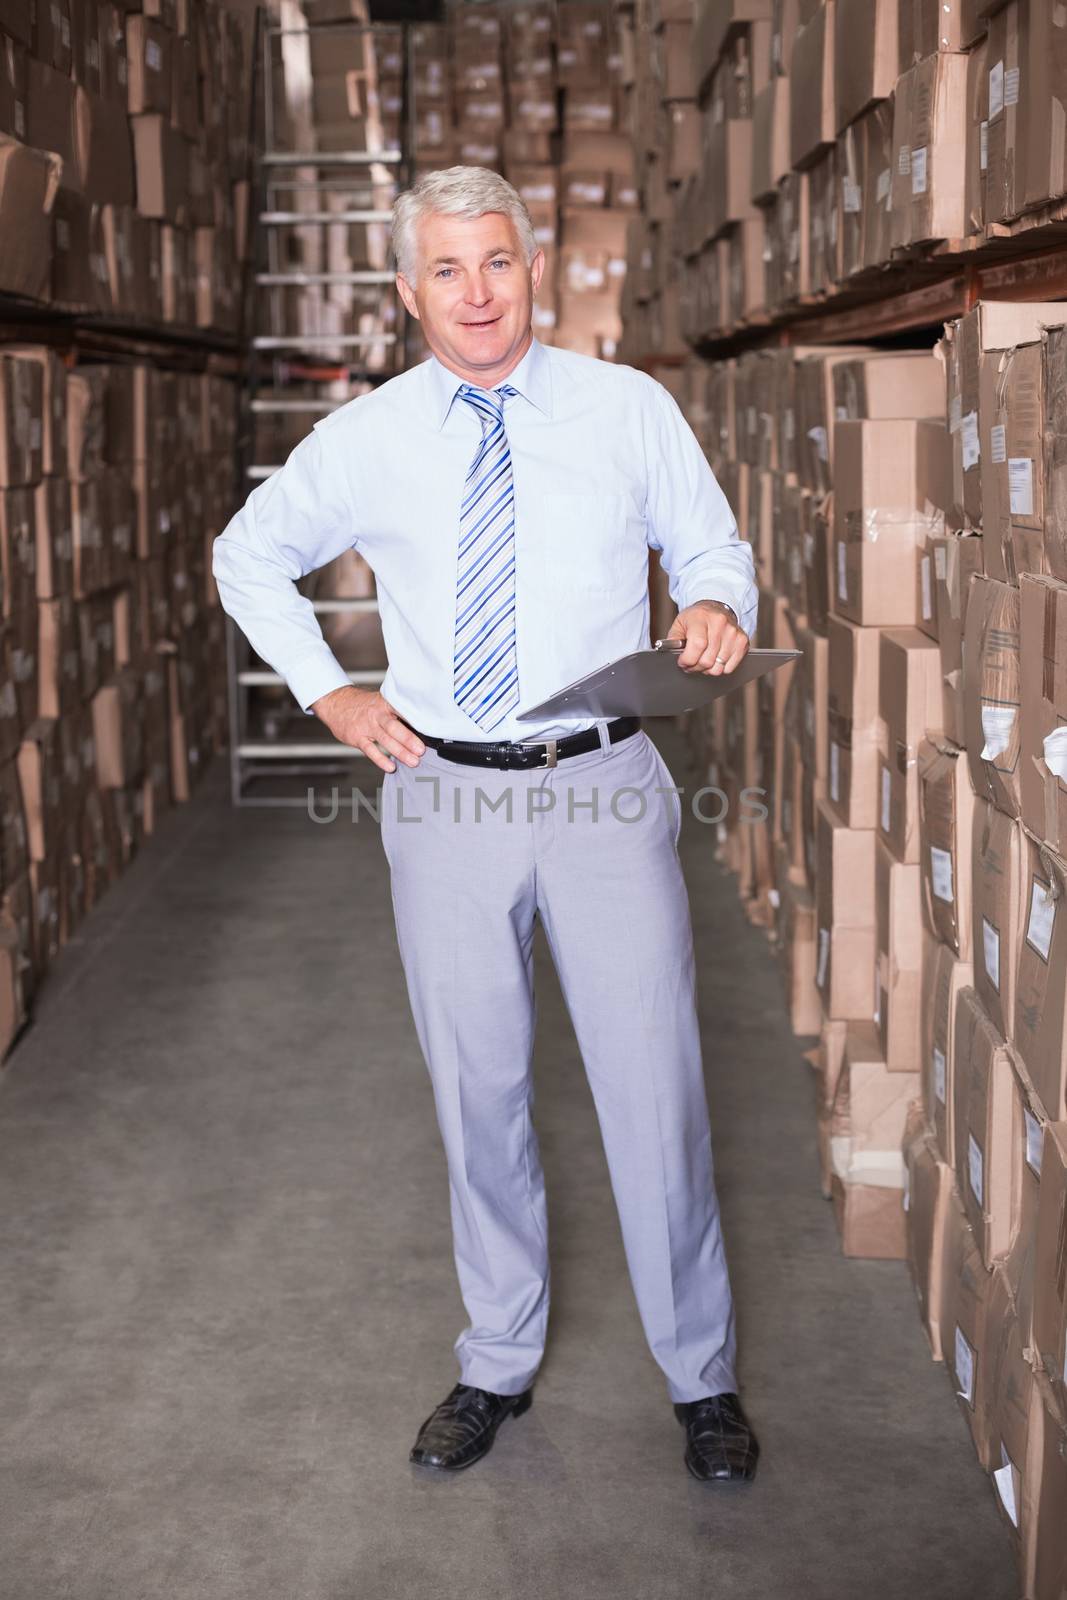 Warehouse manager smiling at camera in a large warehouse